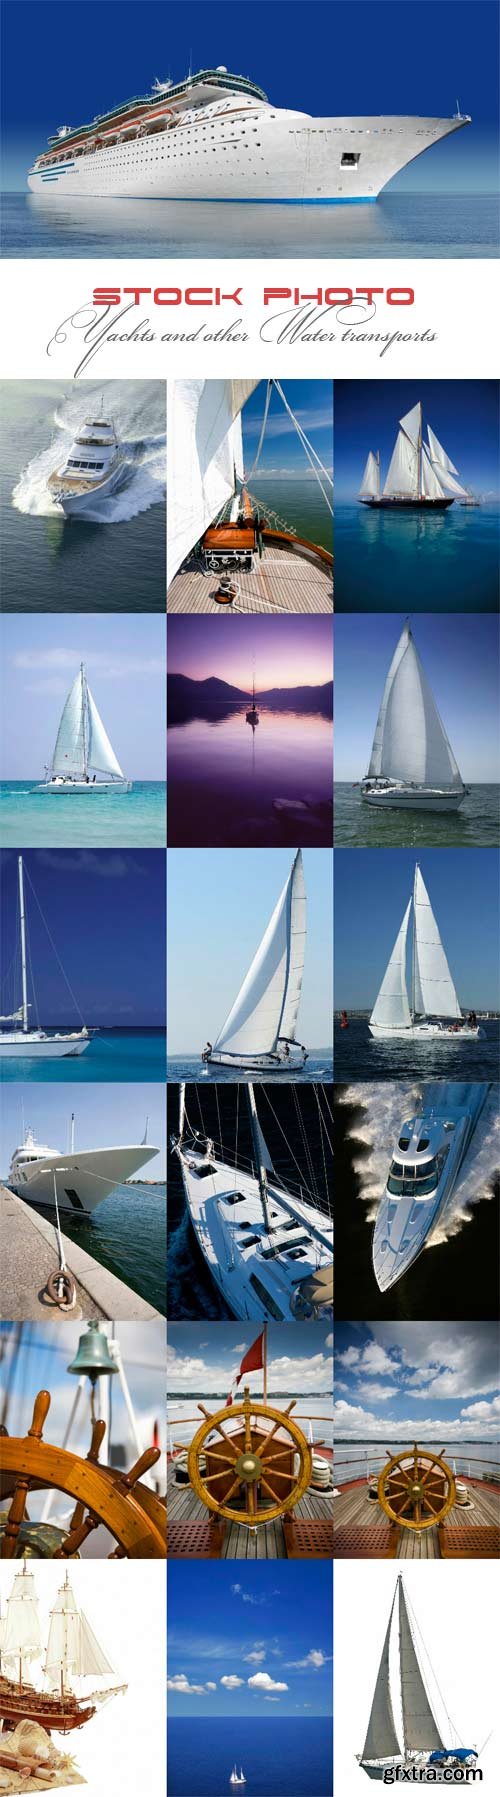 Yachts and other water transport